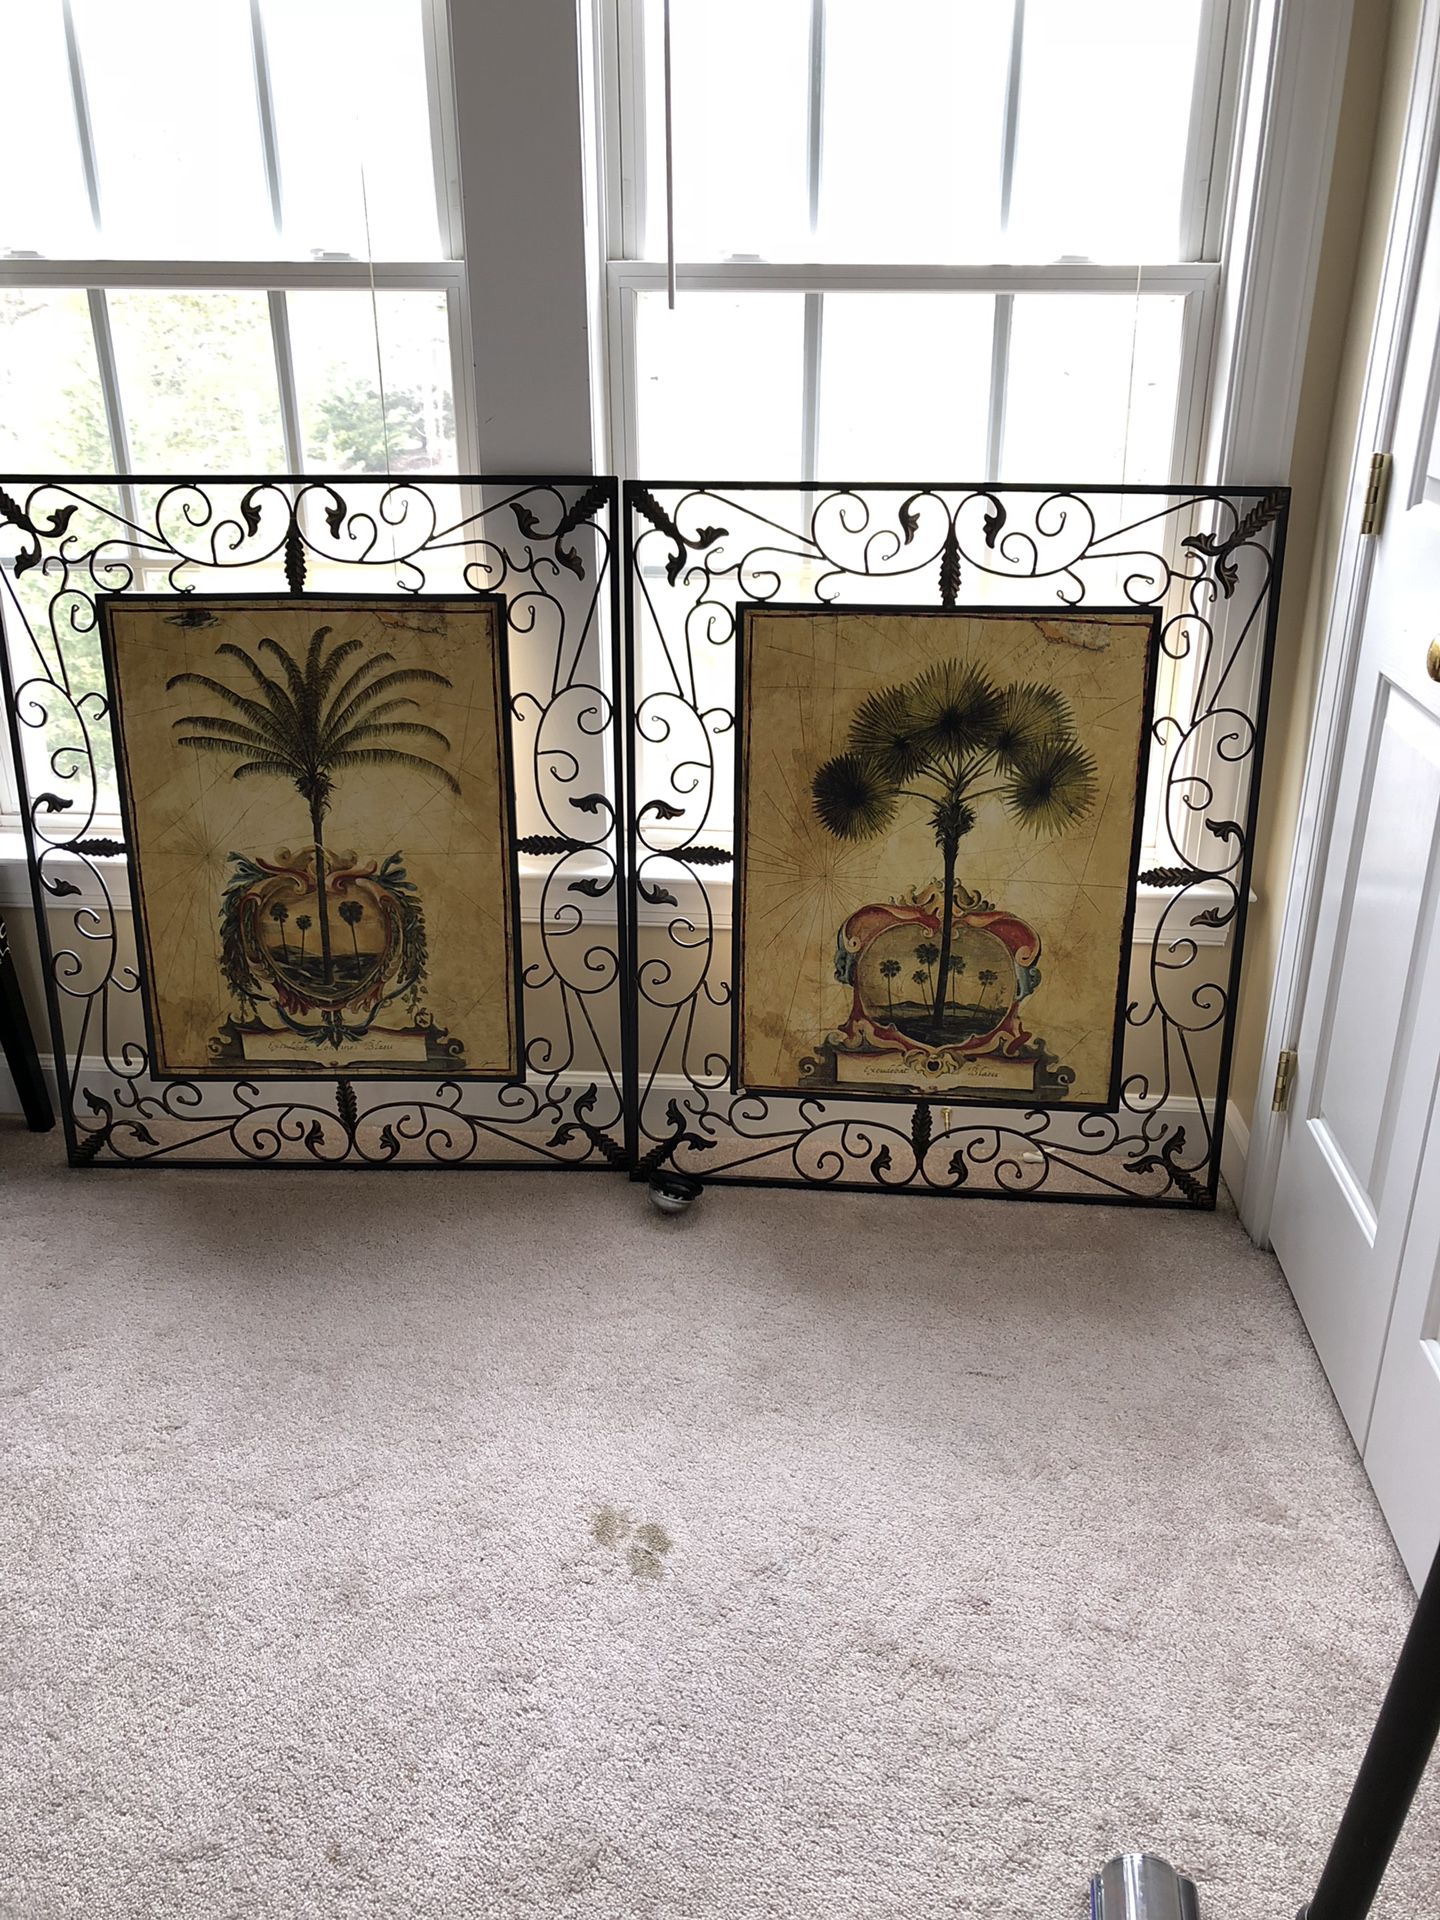 Two New huge metal hand painted wall art 34”X40” $70 for one piece